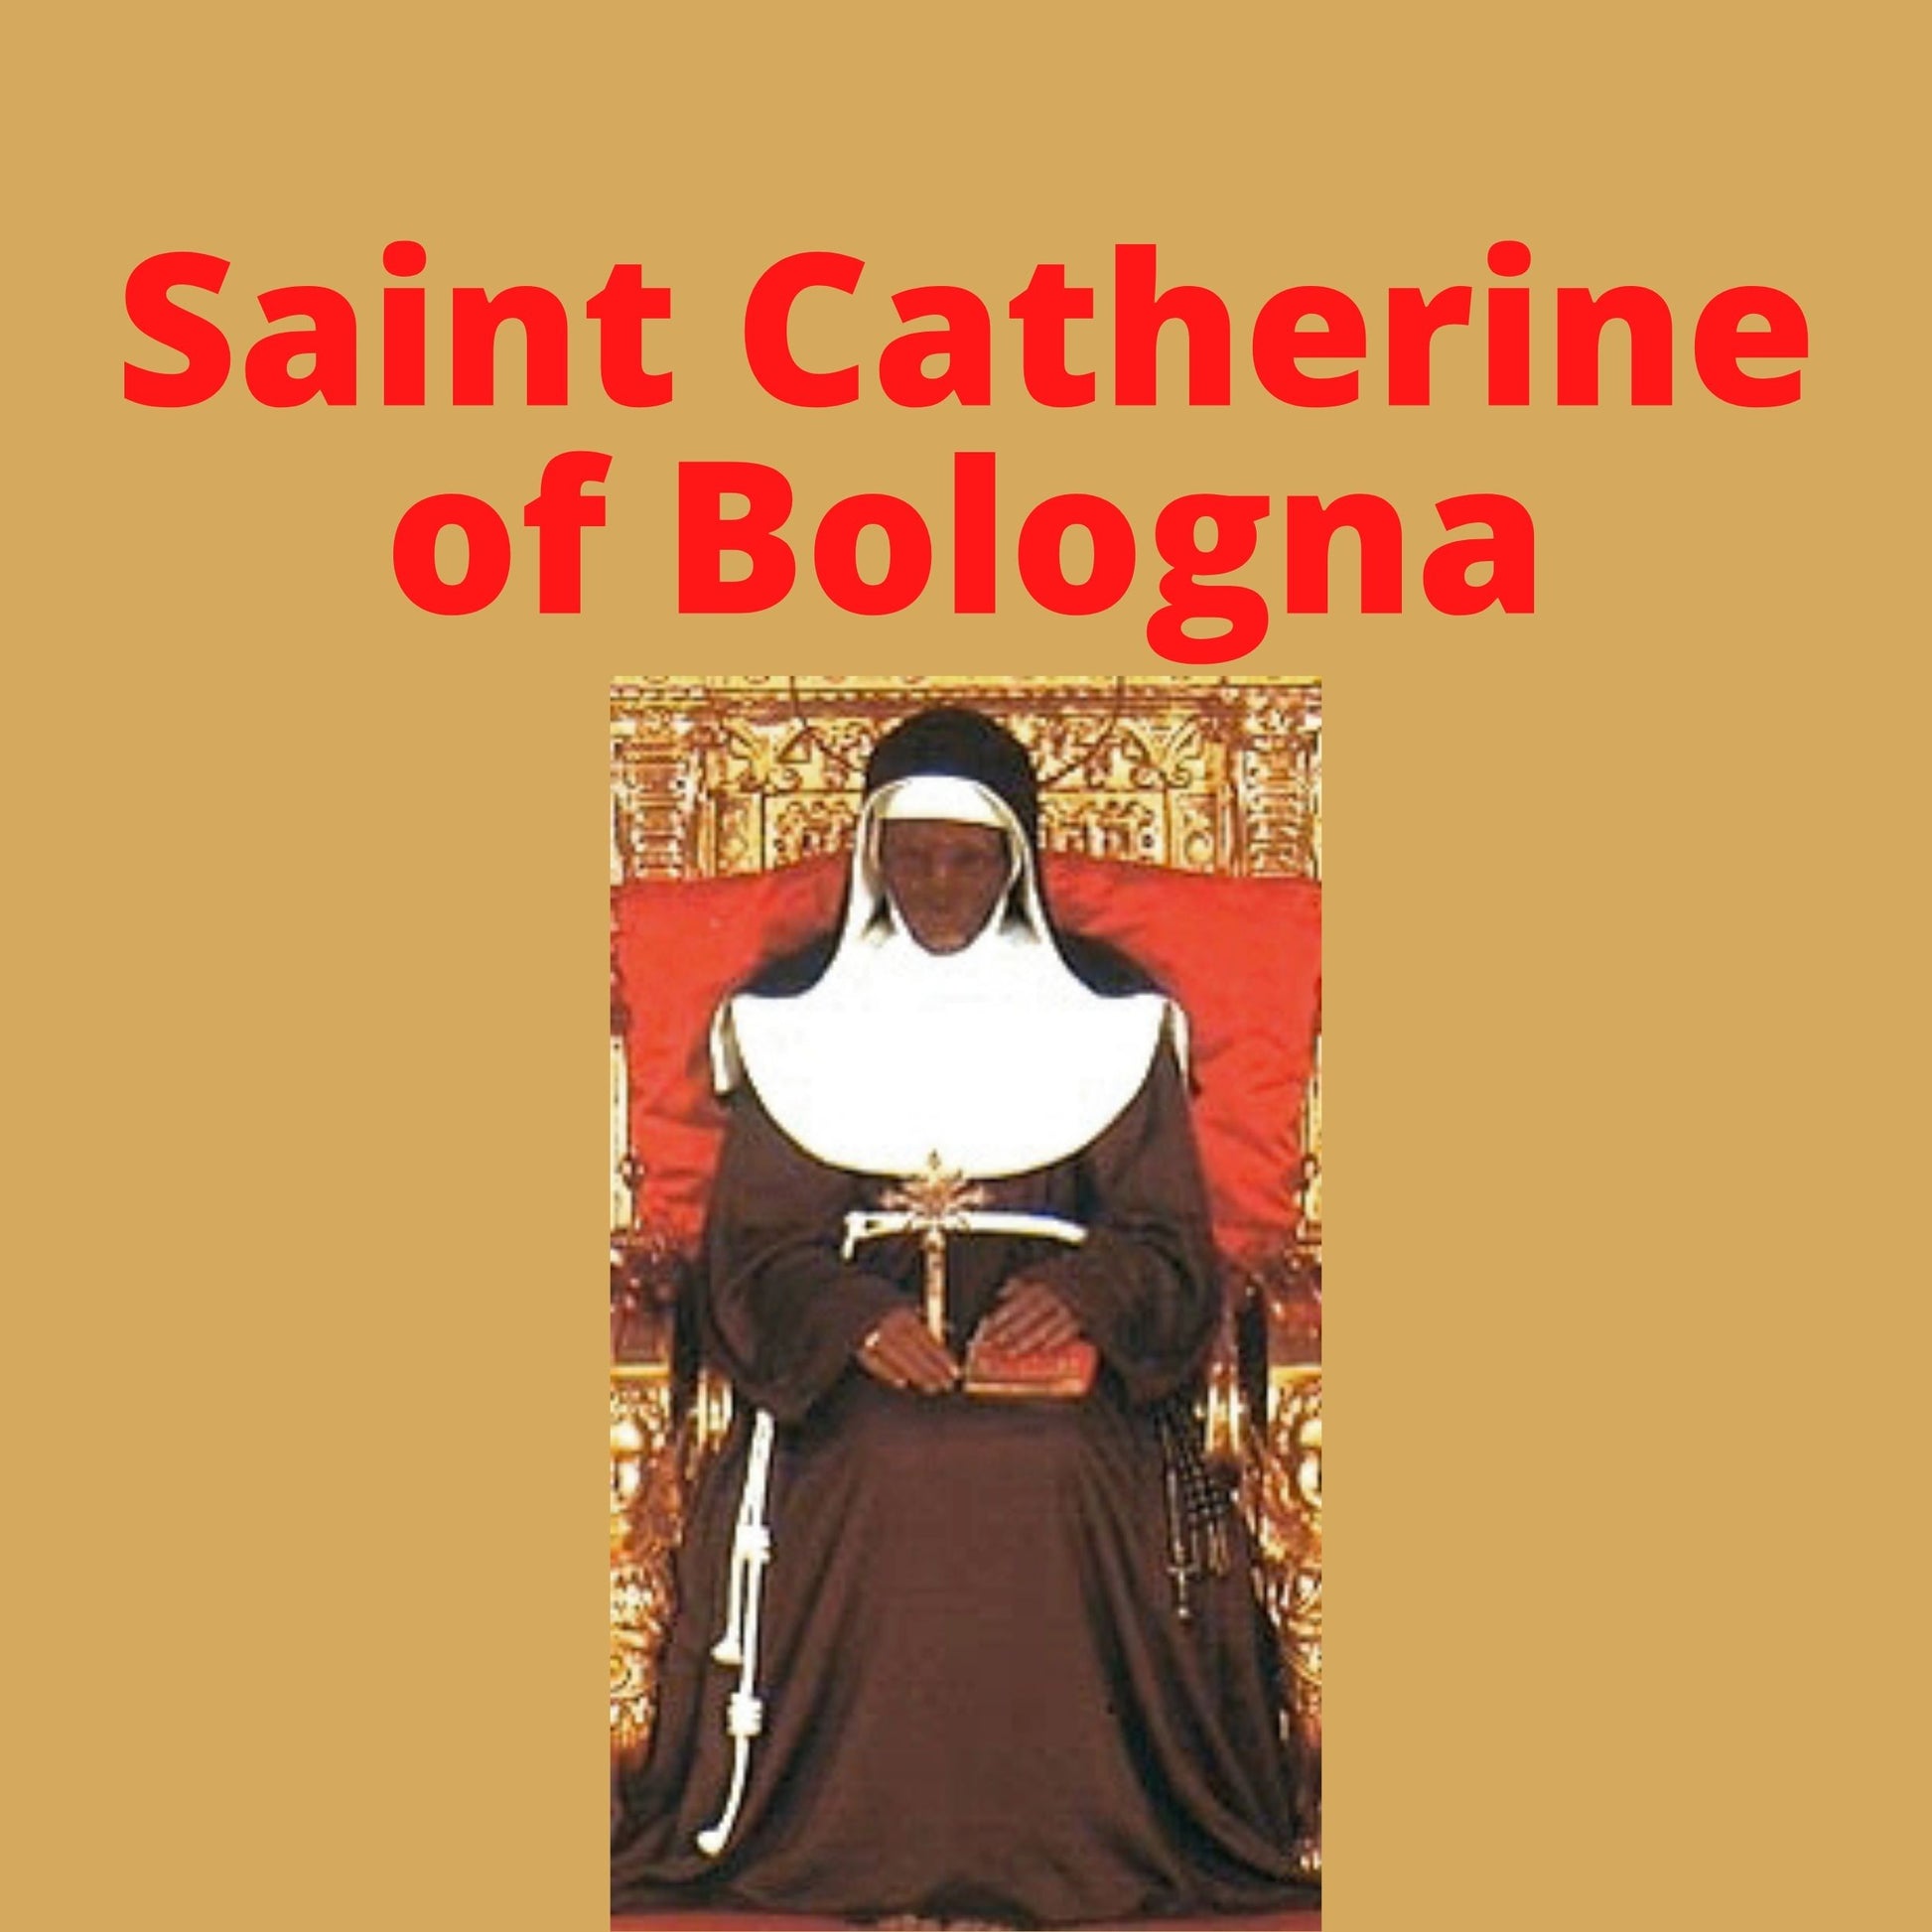 Saint Catherine of Bologna Video Download MP4 - Bob and Penny Lord